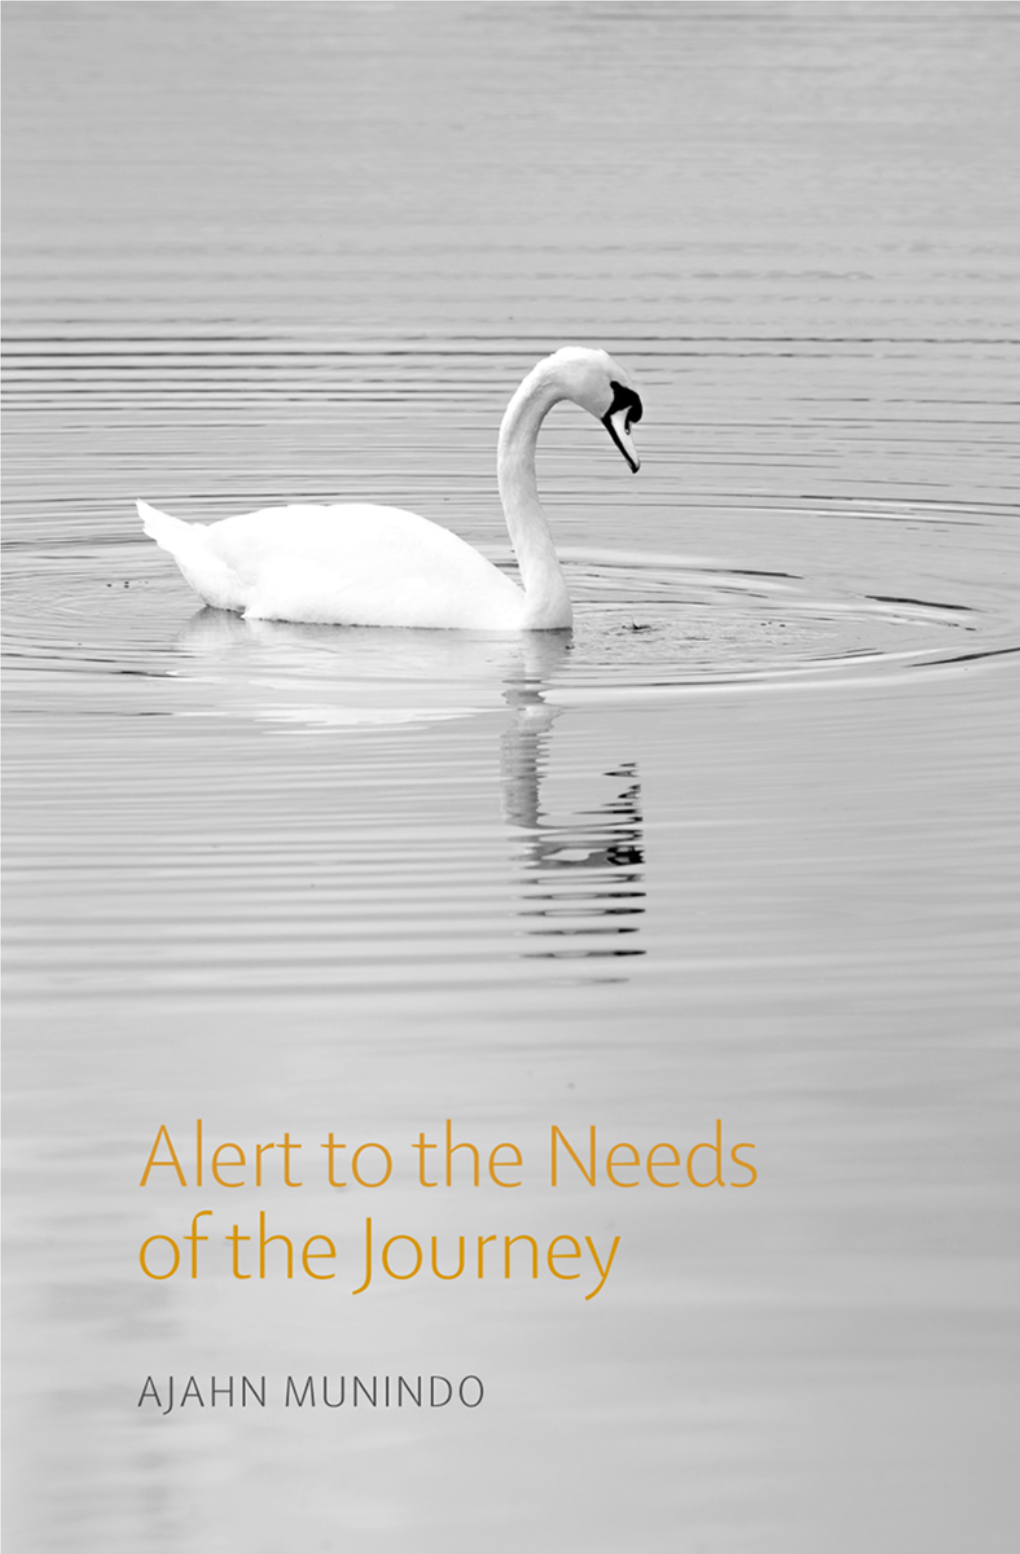 Alert to the Needs of the Journey, Those on the Path of Awareness, Like Swans, Glide On, Leaving Behind Their Former Resting Places